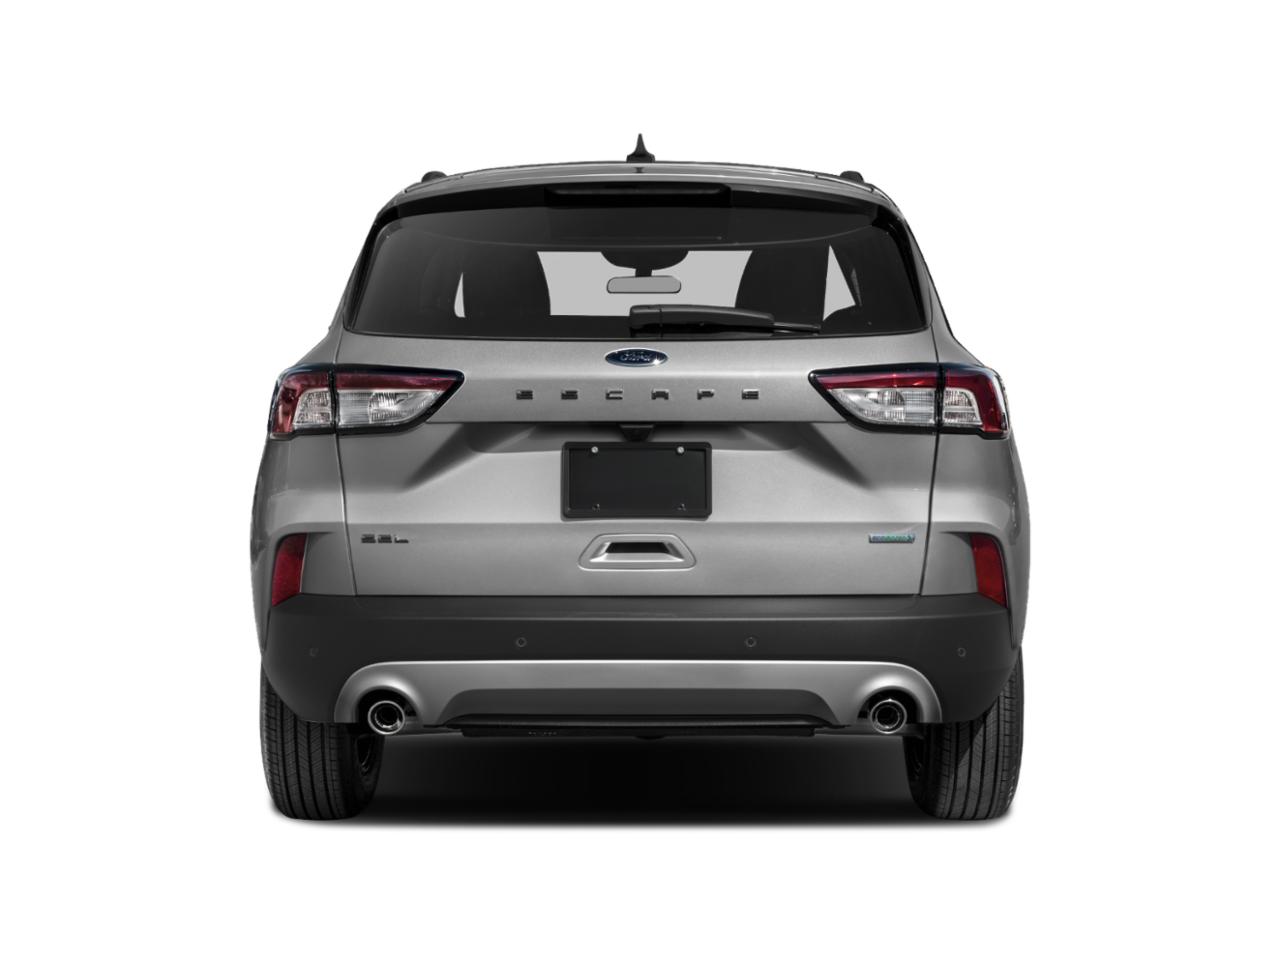 2021 Ford Escape Vehicle Photo in ELYRIA, OH 44035-6349